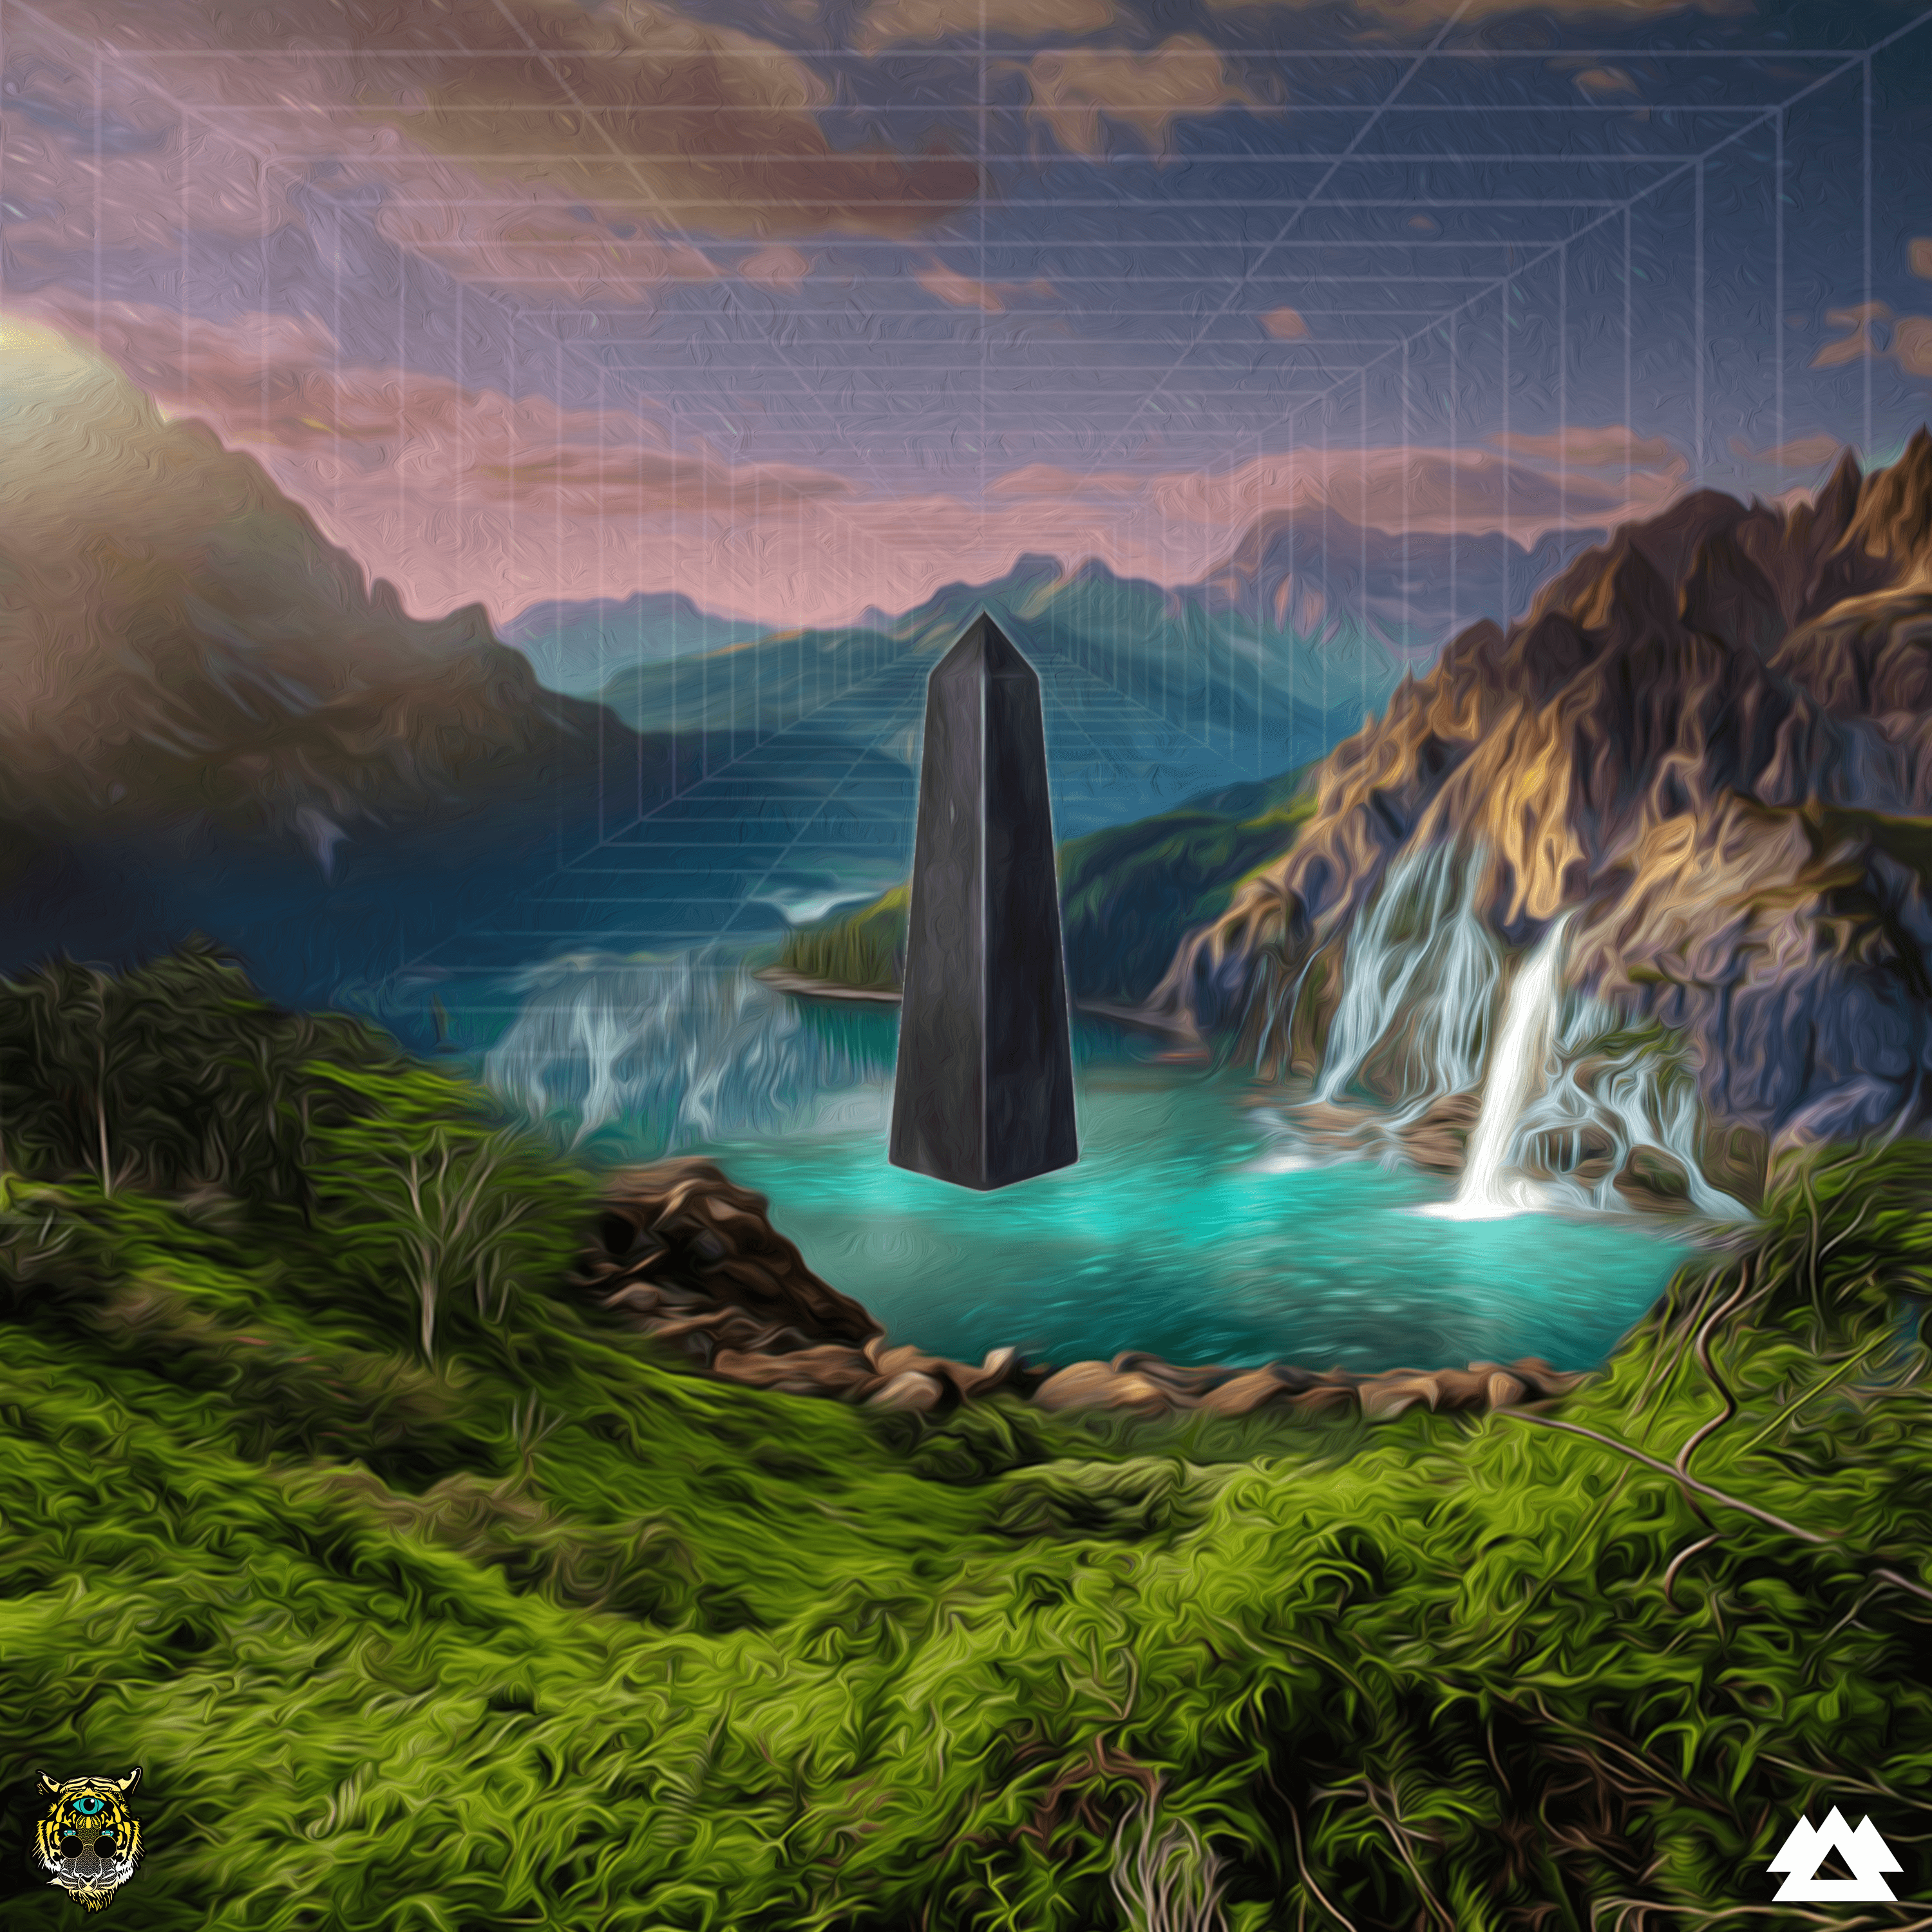 Common Creation Portrays A Picturesque View With ‘Oblique Obelisk’